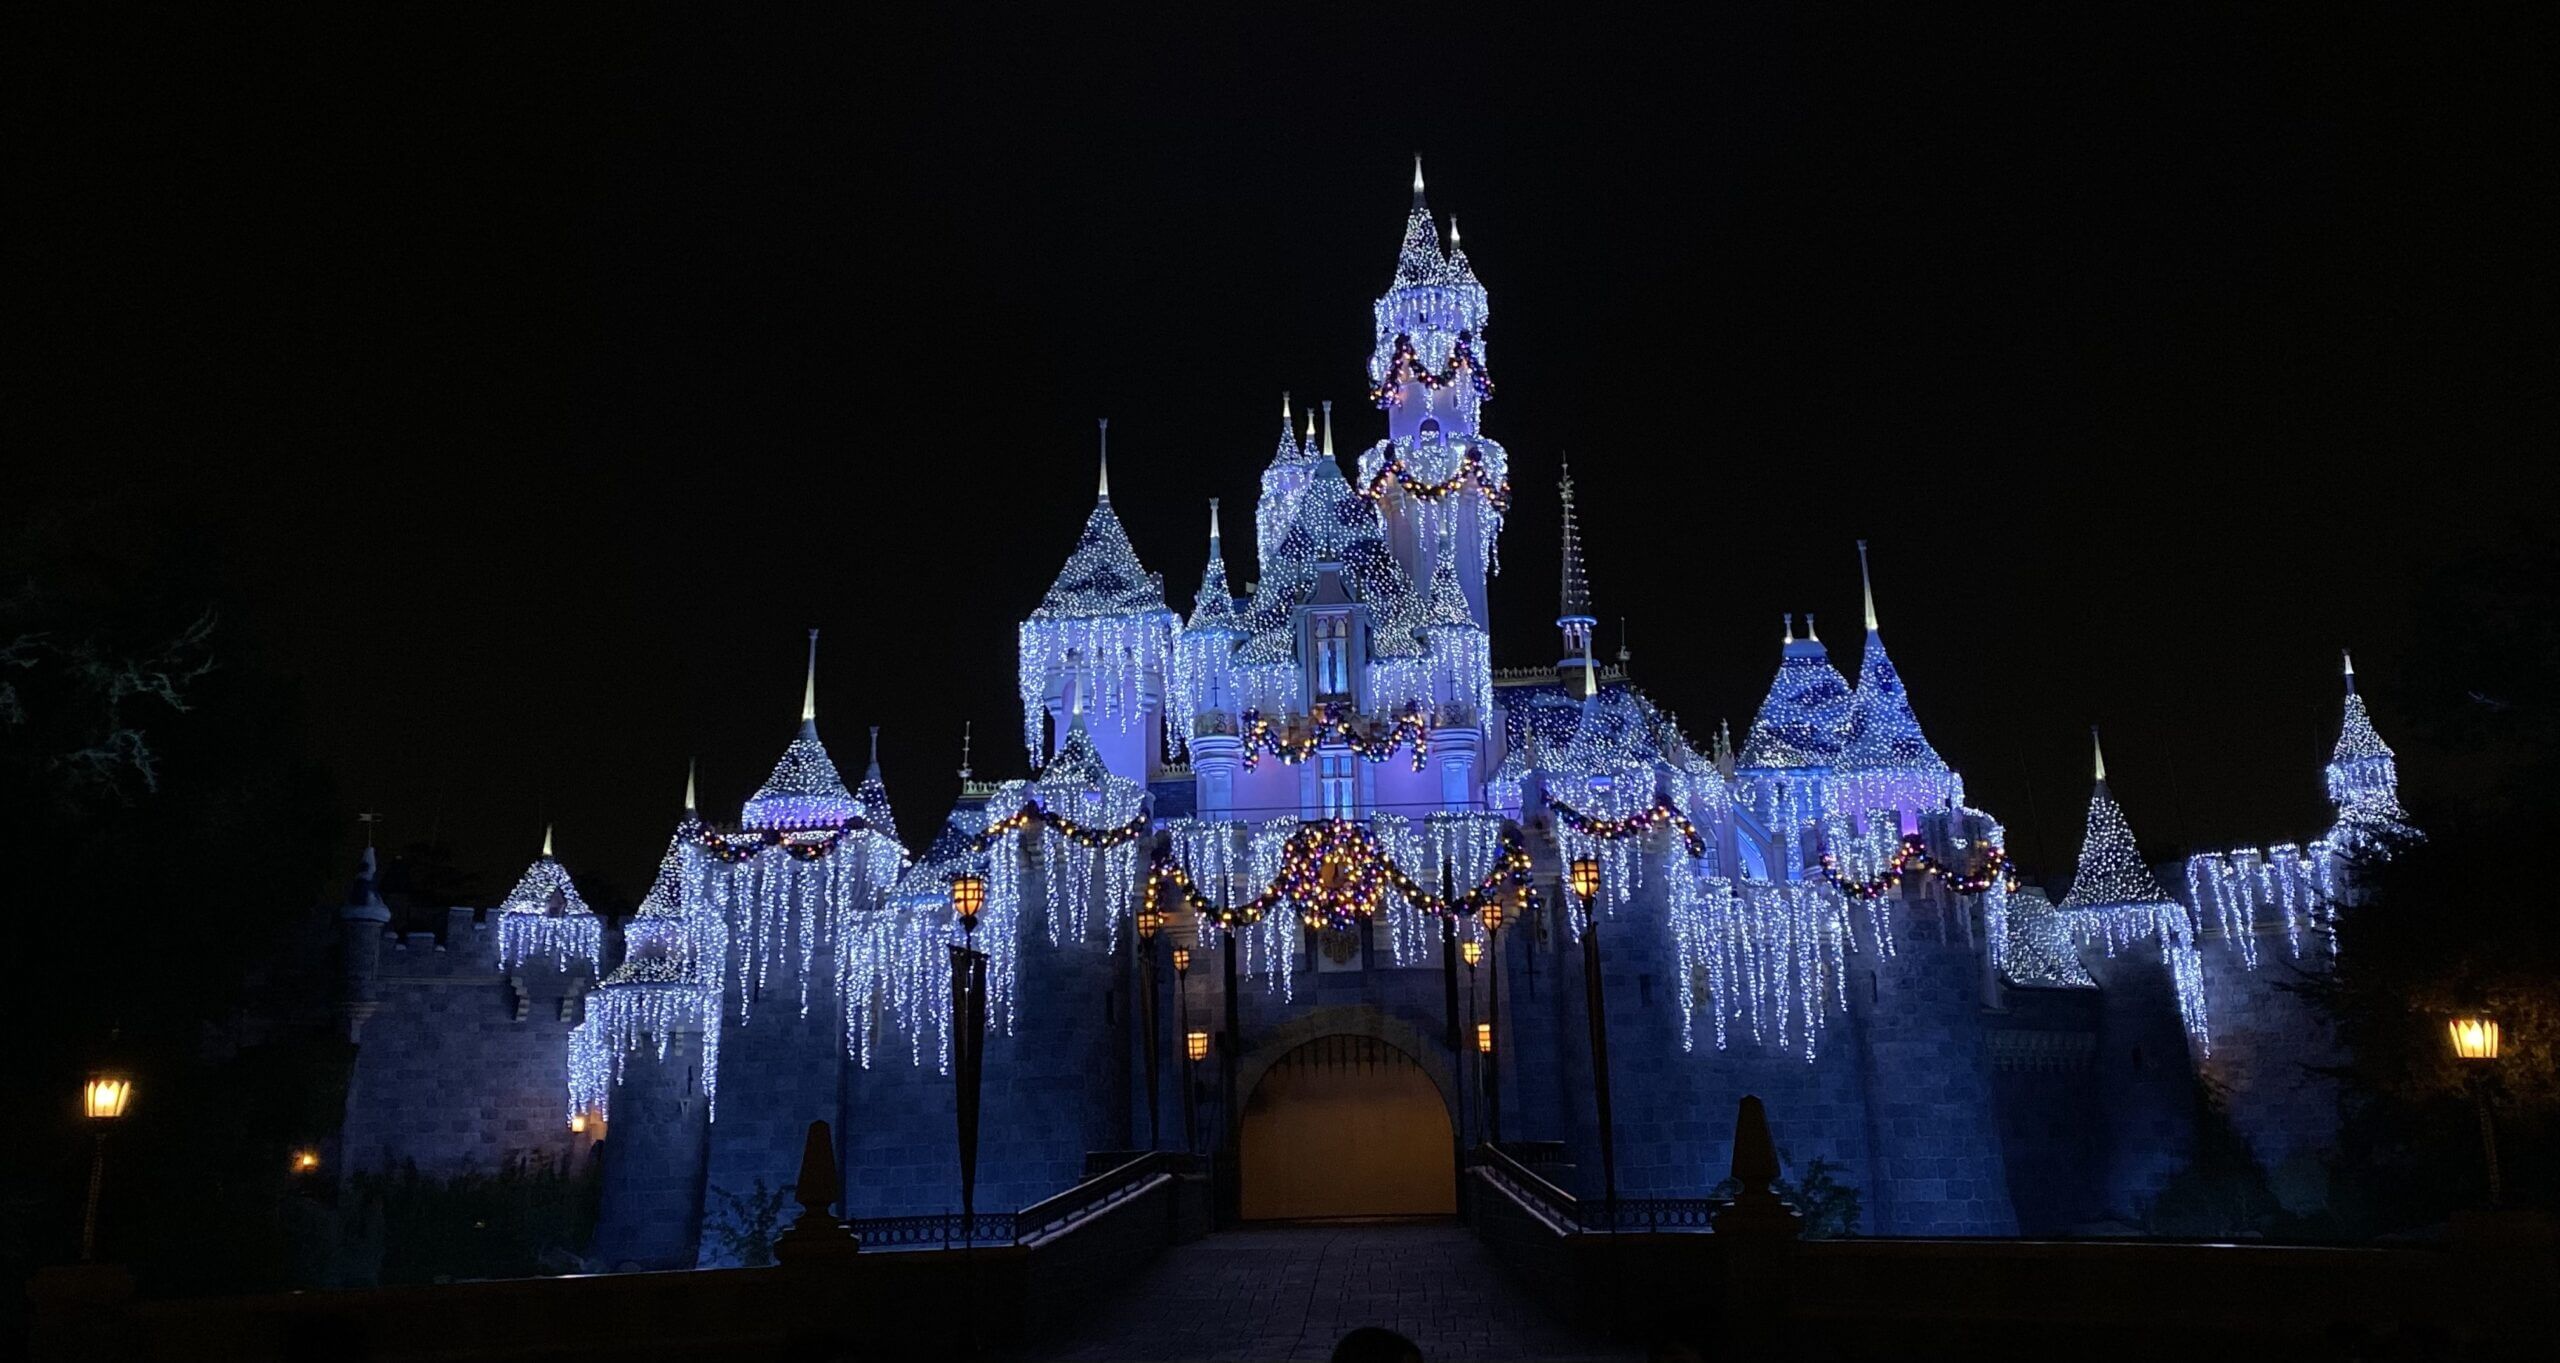 Disneyland Christmas castle night time with lights decoration